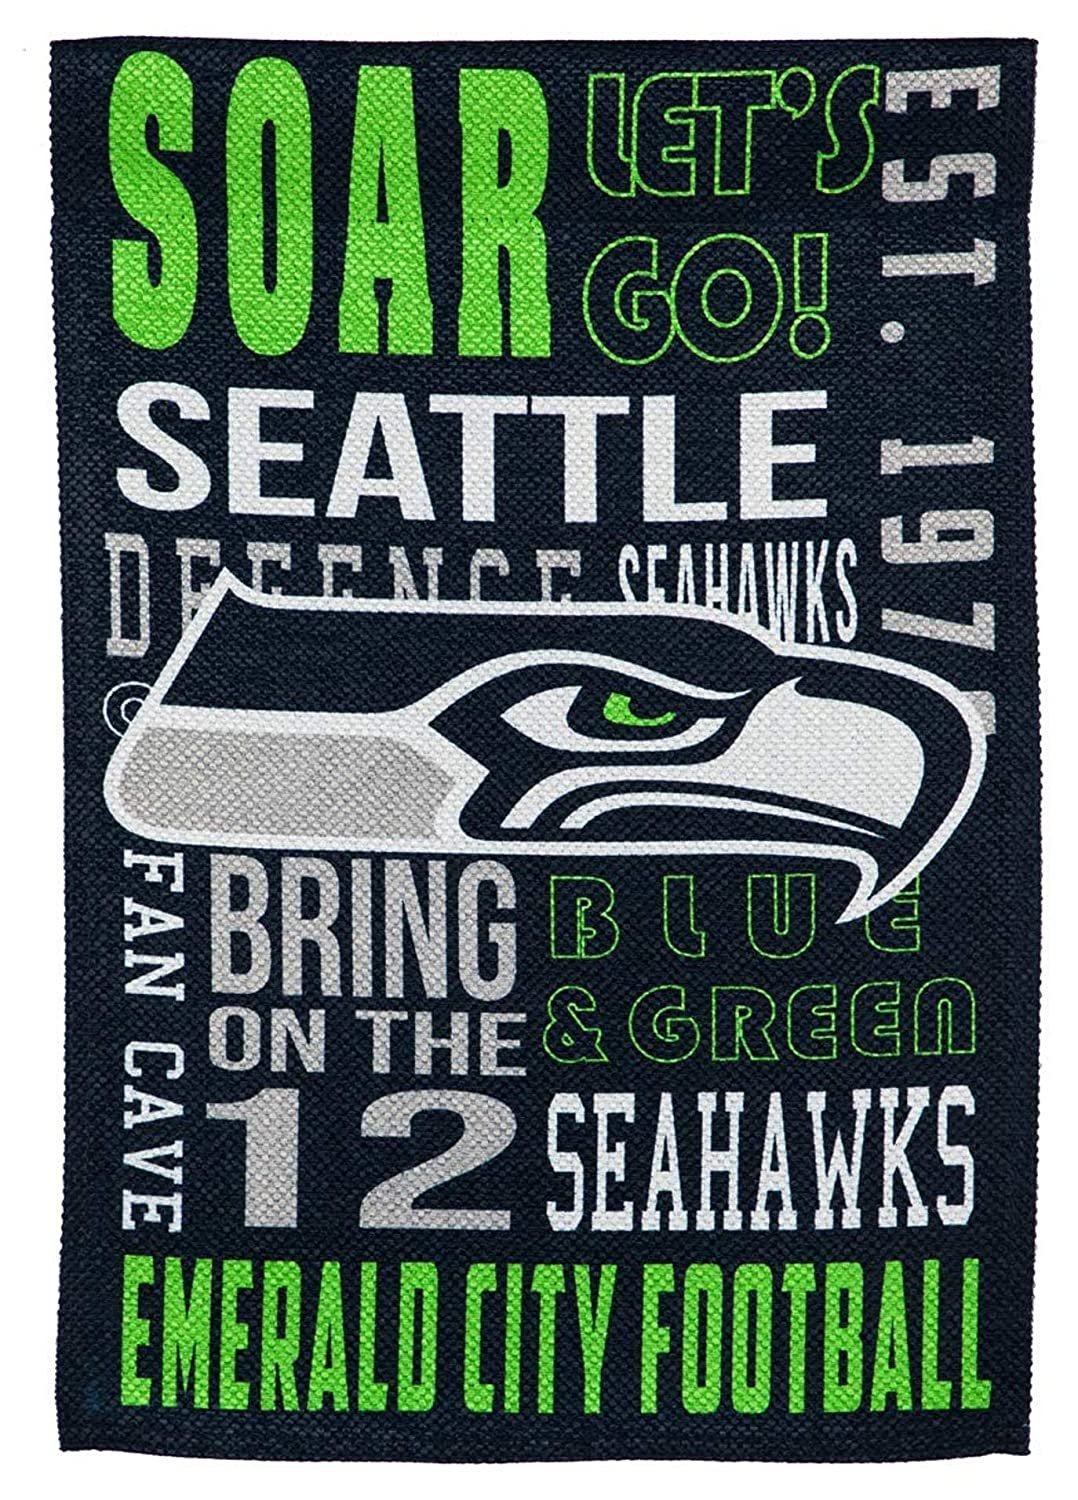 Seattle Seahawks Premium Garden Flag Banner, Double Sided 13x18 Inch, Outdoor Use